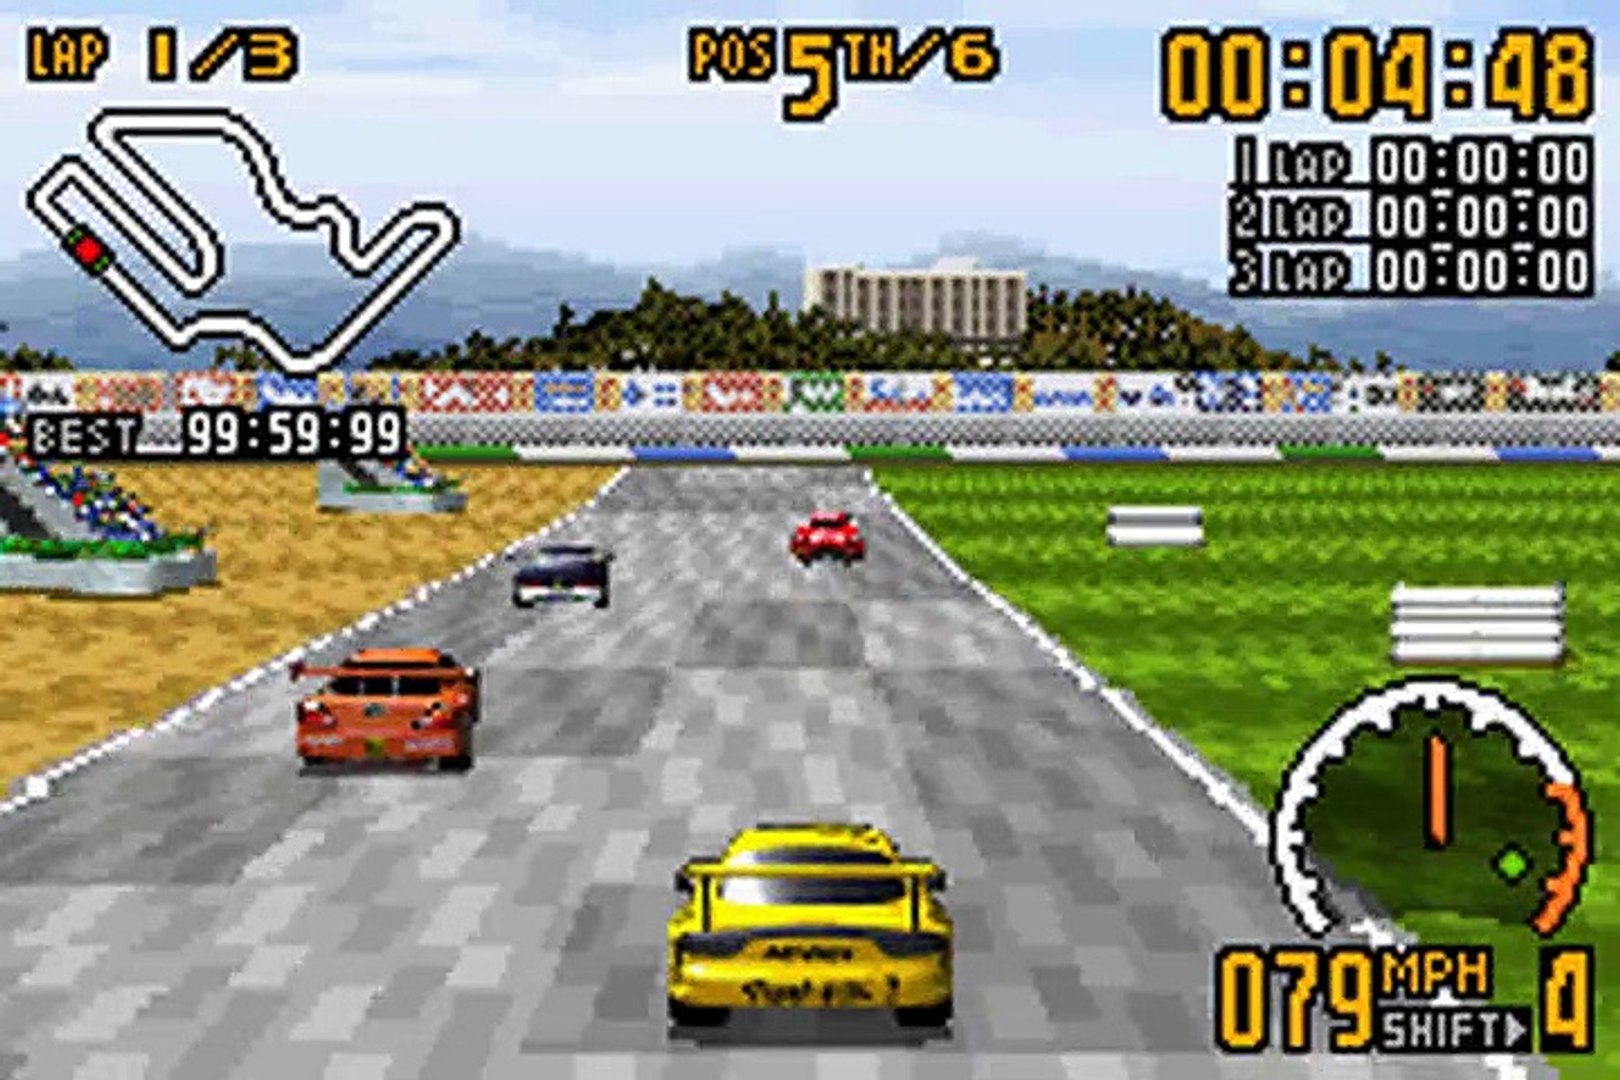 Top Gear Gt Championship online multiplayer - gba - Vidéo Dailymotion